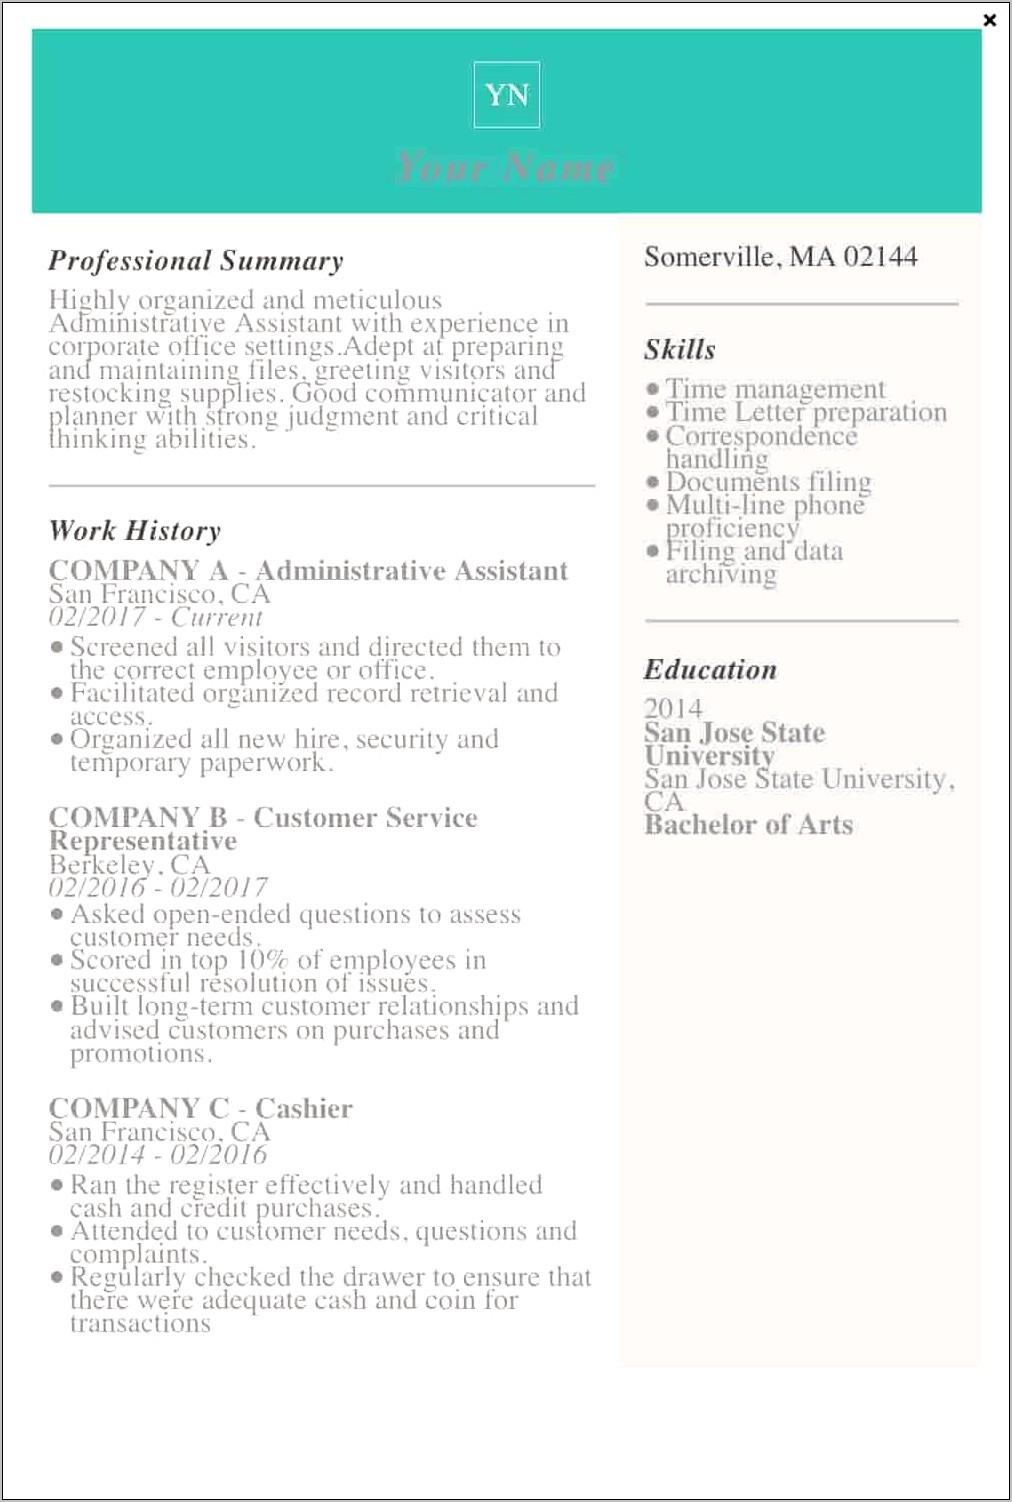 Resume In Objective For Temp Jobs